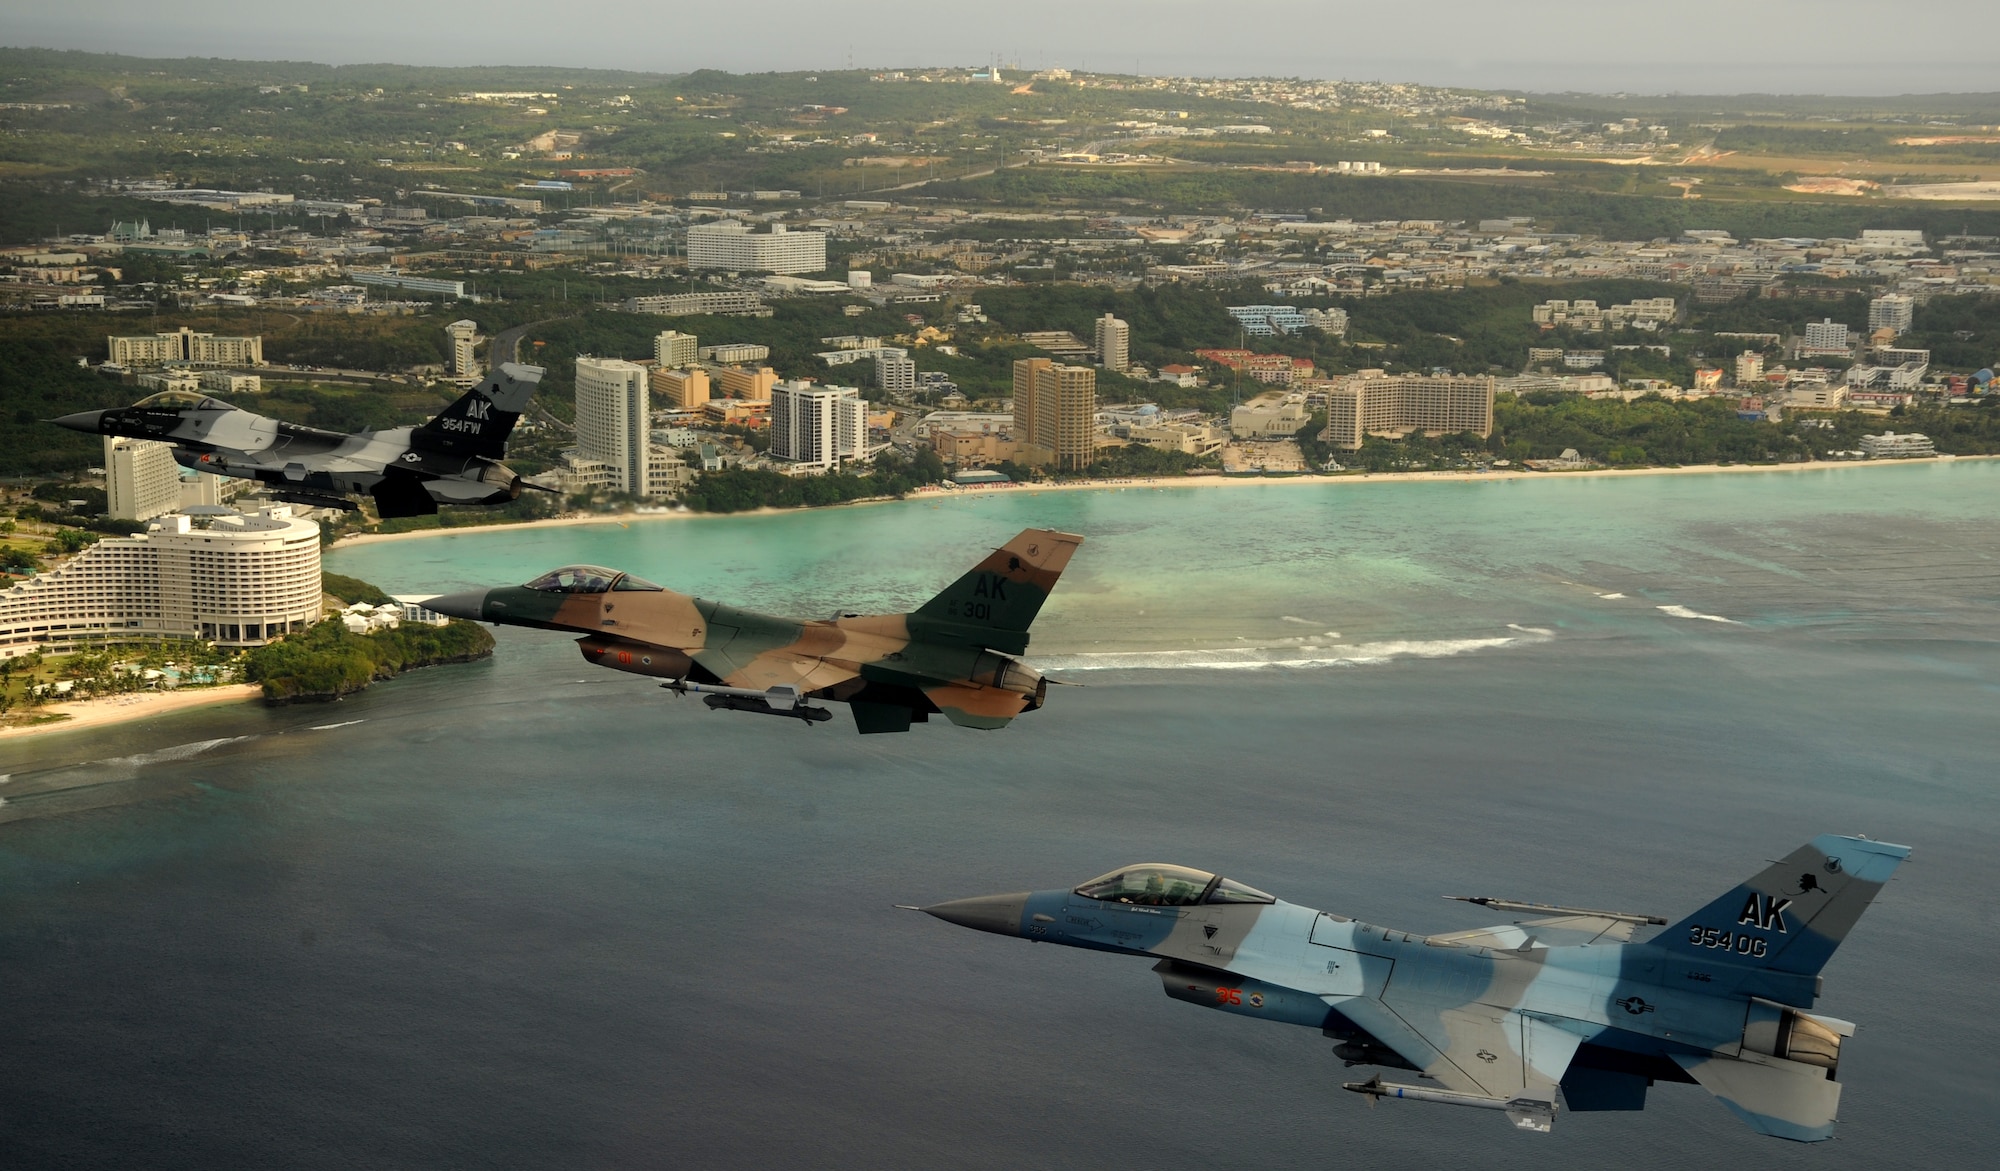 A 3-ship of F-16 Fighting Falcons, 18th Aggressor Squadron, Eielson Air Force Base, Alaska, fly in formation over Tumon Bay, Guam during exercise Cope North 09-1, Feb. 10. Units from the U.S. Air Force, U.S. Navy, and the Japan Air Self Defense Force are participating in exercise Cope North at Andersen AFB, Guam from Feb. 2-13. Cope North 09-1 is the first iteration of a regularly scheduled joint and bilateral exercise and is part of the on-going series of exercises designed to enhance air operations in defense of Japan.

(U.S. Air Force photo/ Master Sgt. Kevin J. Gruenwald) released

